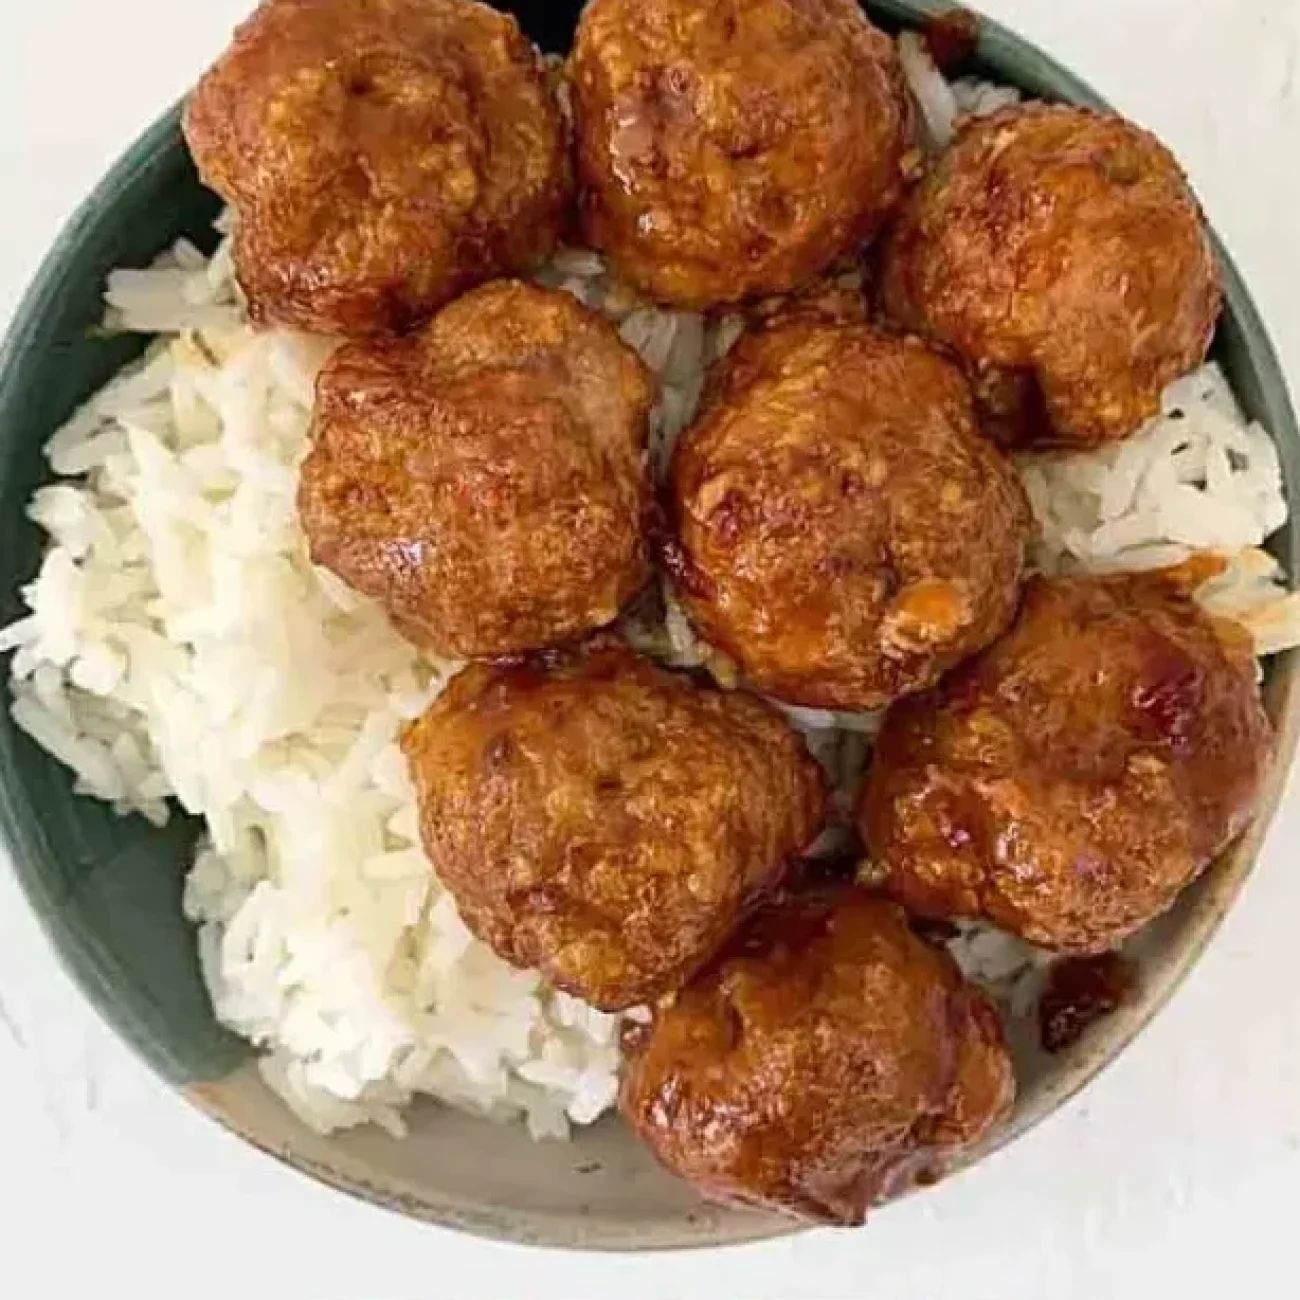 Spicy Thai Pork Meatballs with Garlic and Chili